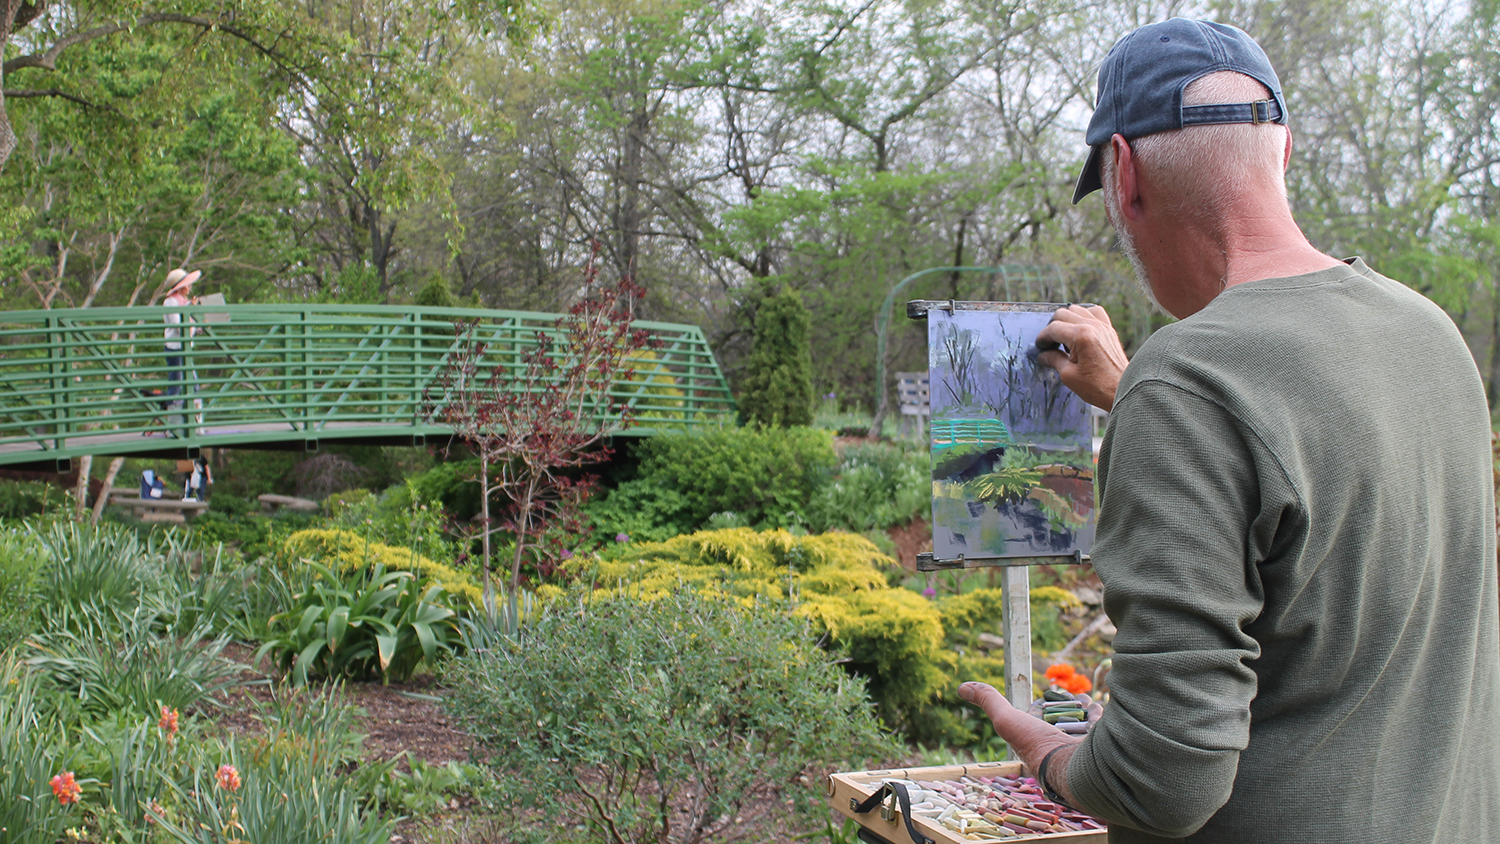 A man sketches a footbridge and surrounding plants and flowers at the Overland Park Arboretum & Botanical Gardens.